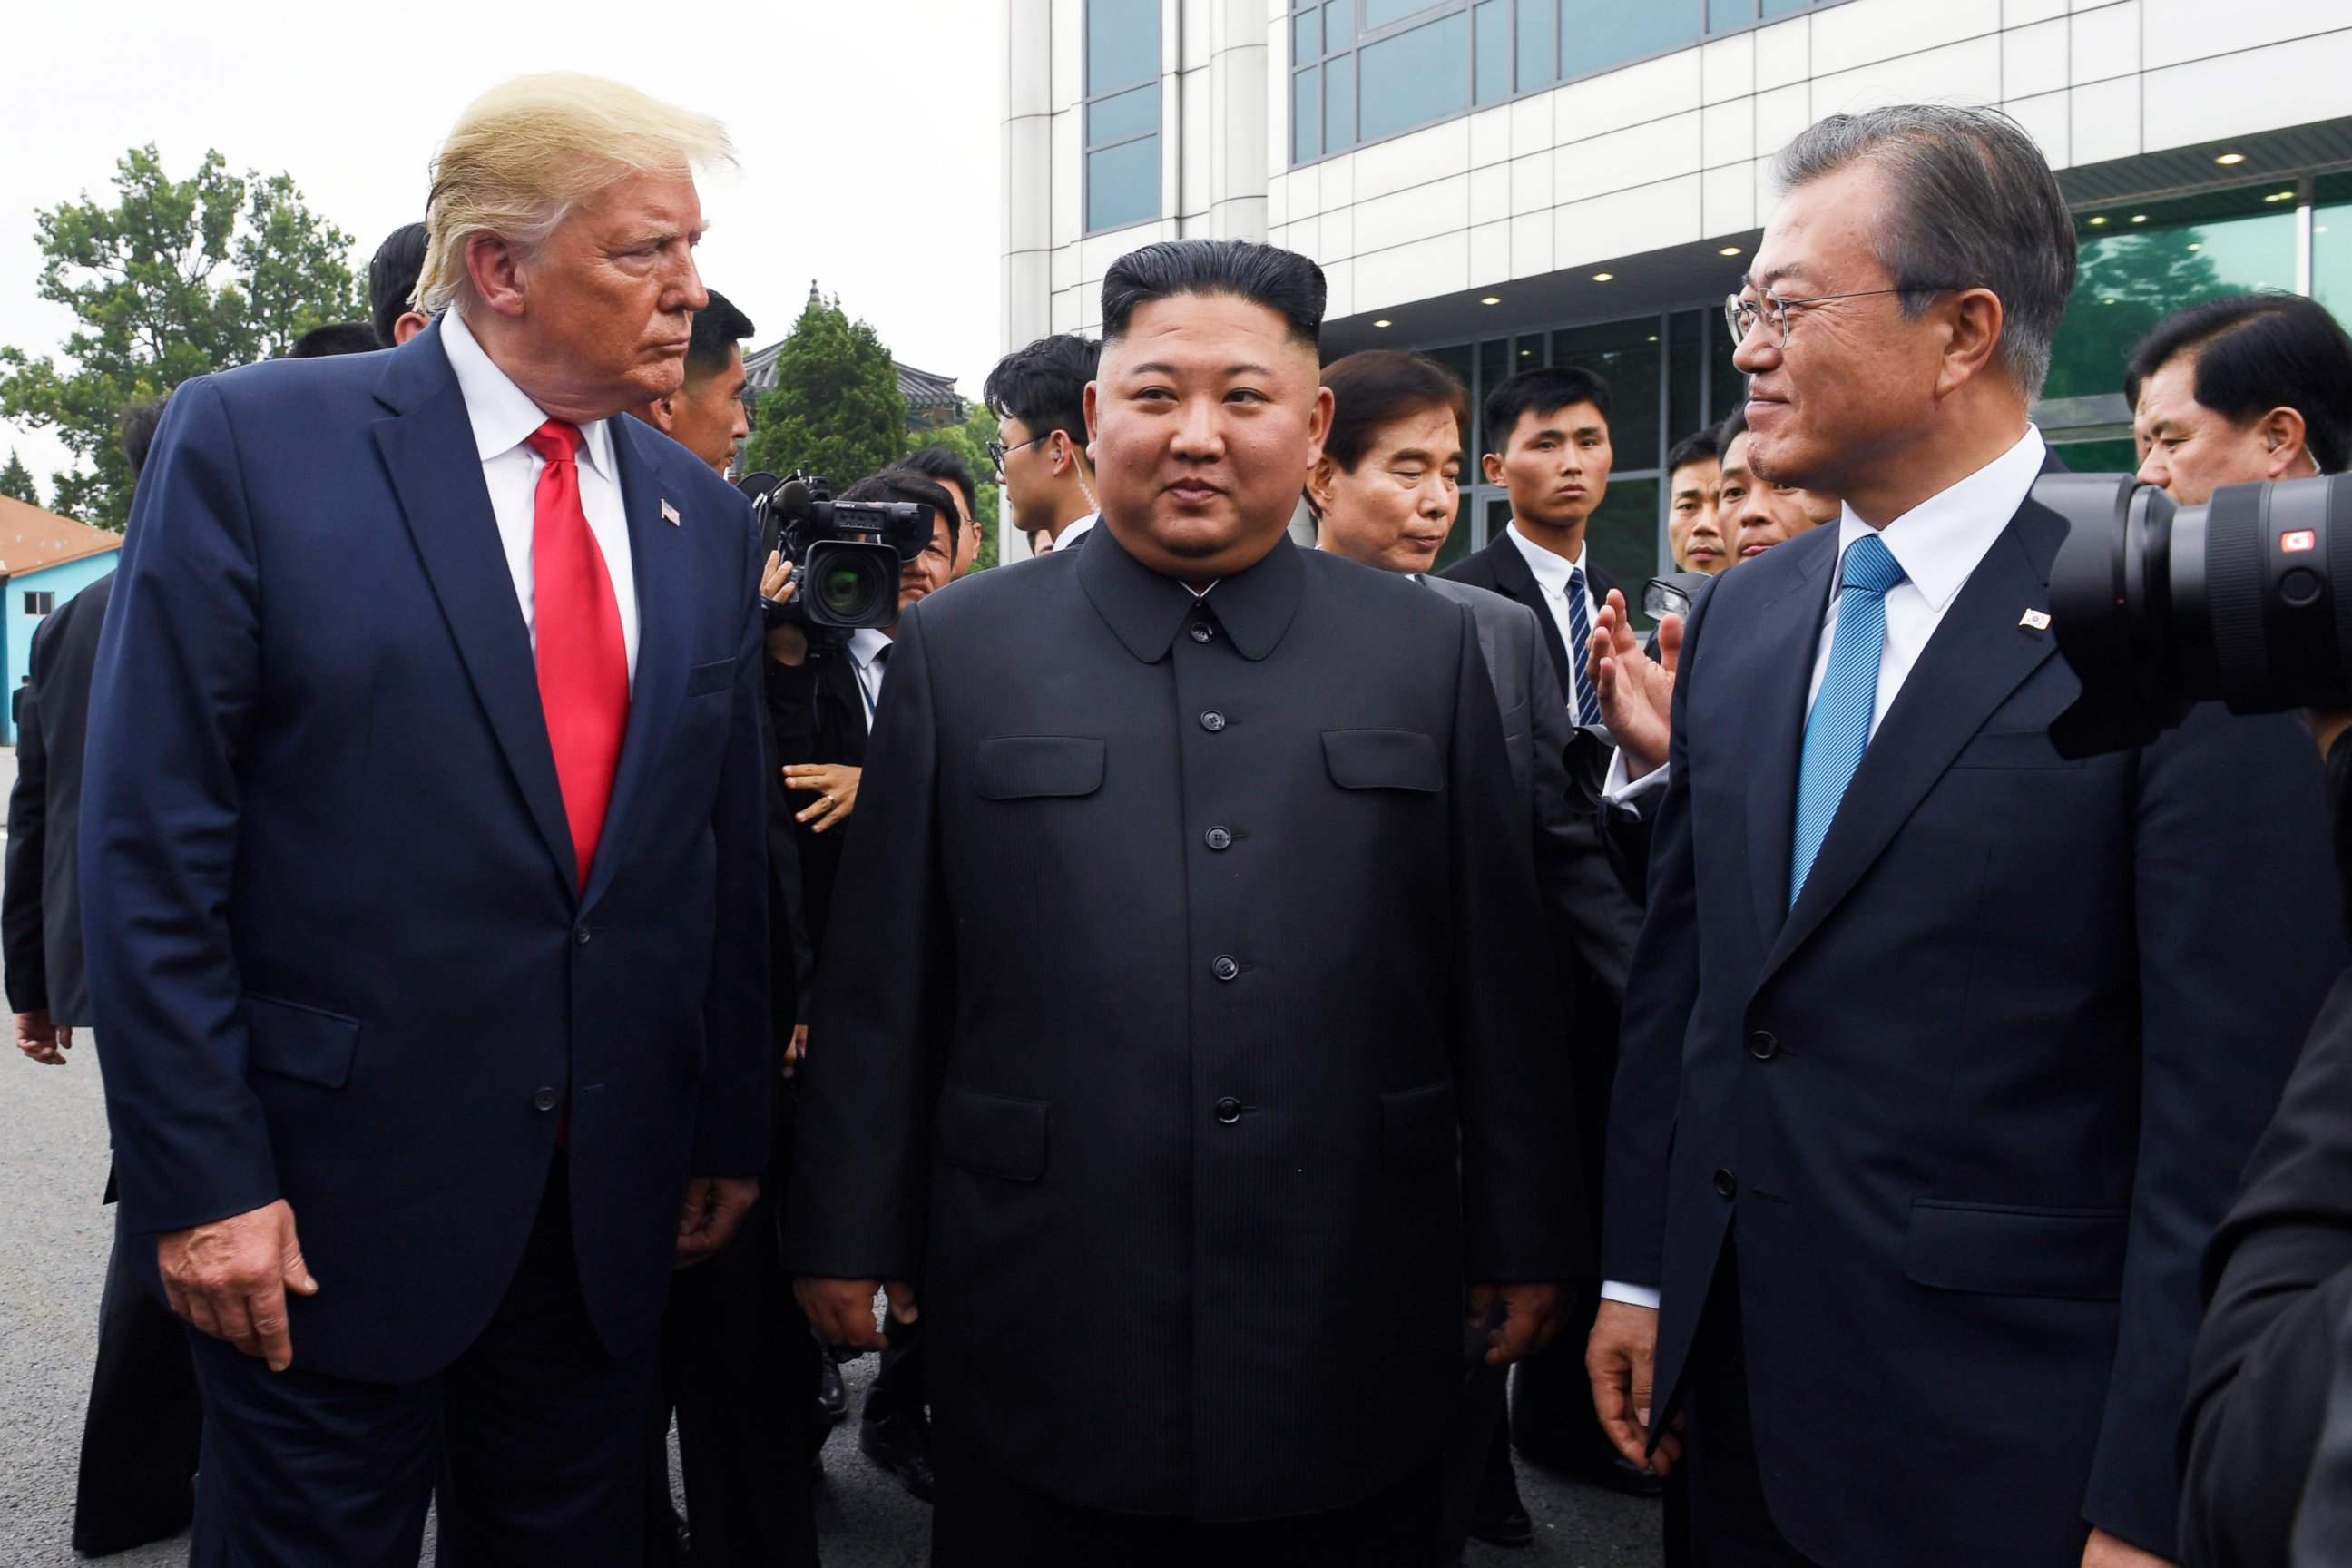 PHOTO: President Donald Trump meets with North Korean leader Kim Jong Un and South Korean President Moon Jae-in, right, at the border village of Panmunjom in the Demilitarized Zone, South Korea, Sunday, June 30, 2019.